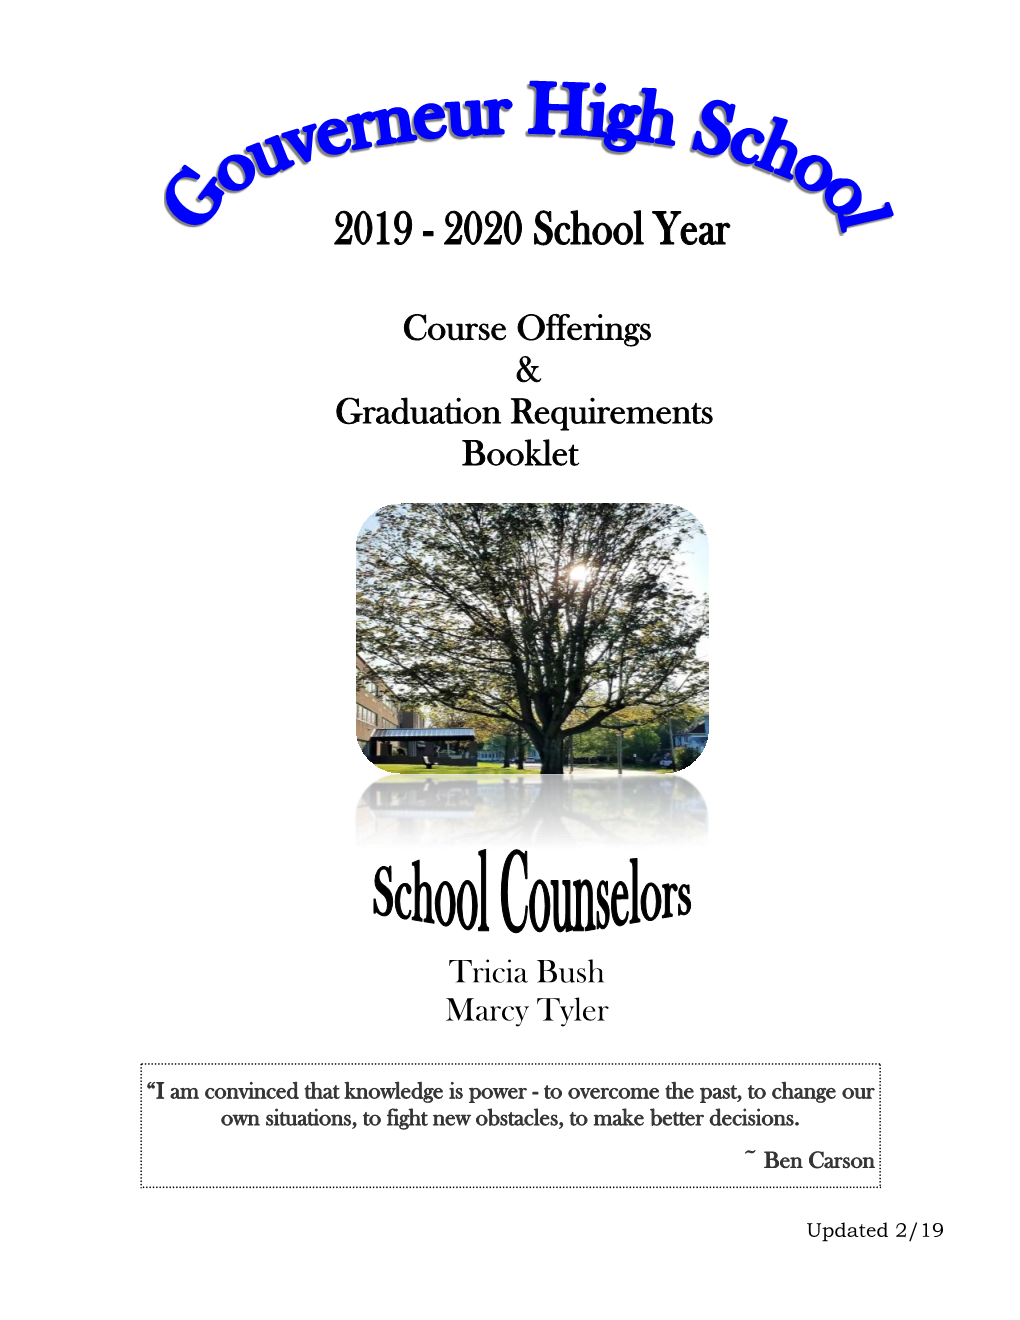 Course Offerings & Graduation Requirements Booklet